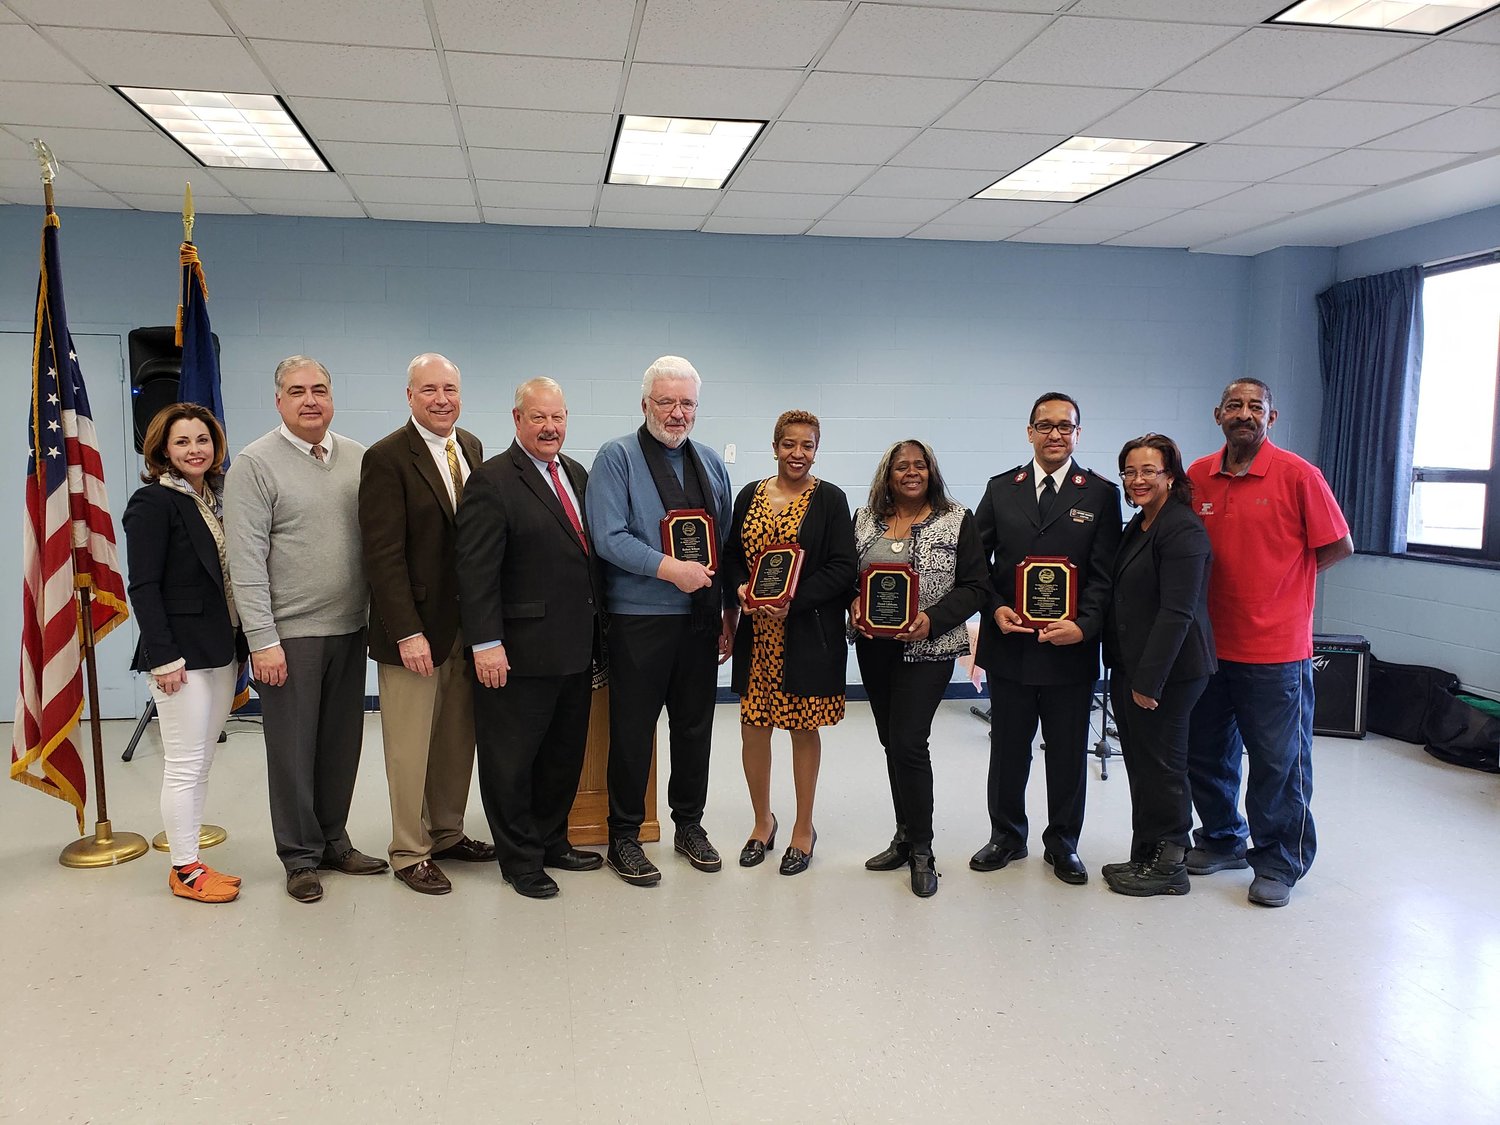 After the ceremony, Town of Hempstead Councilwoman Erin King Sweeney, far left, joined Freeport board of trustees members Jorge Martinez and William White, Mayor Robert Kennedy, the four honorees, Carmen Pineryo and Ron Ellerbe.